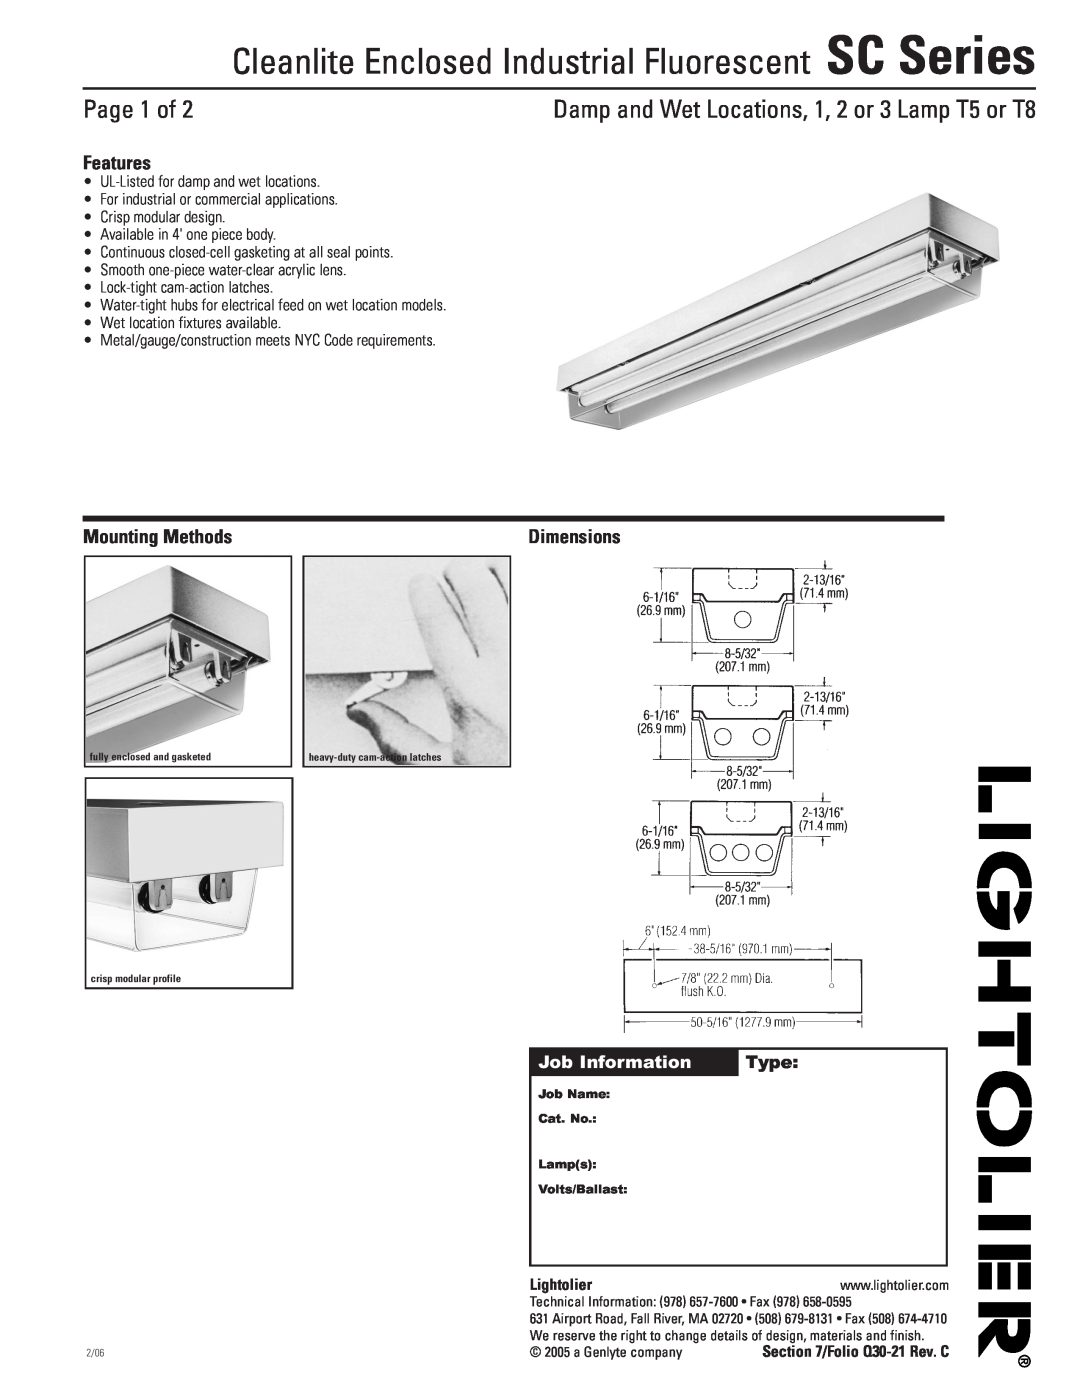 Lightolier SC Series dimensions Page 1 of, Features, Mounting Methods, Job Information, Type, Dimensions 